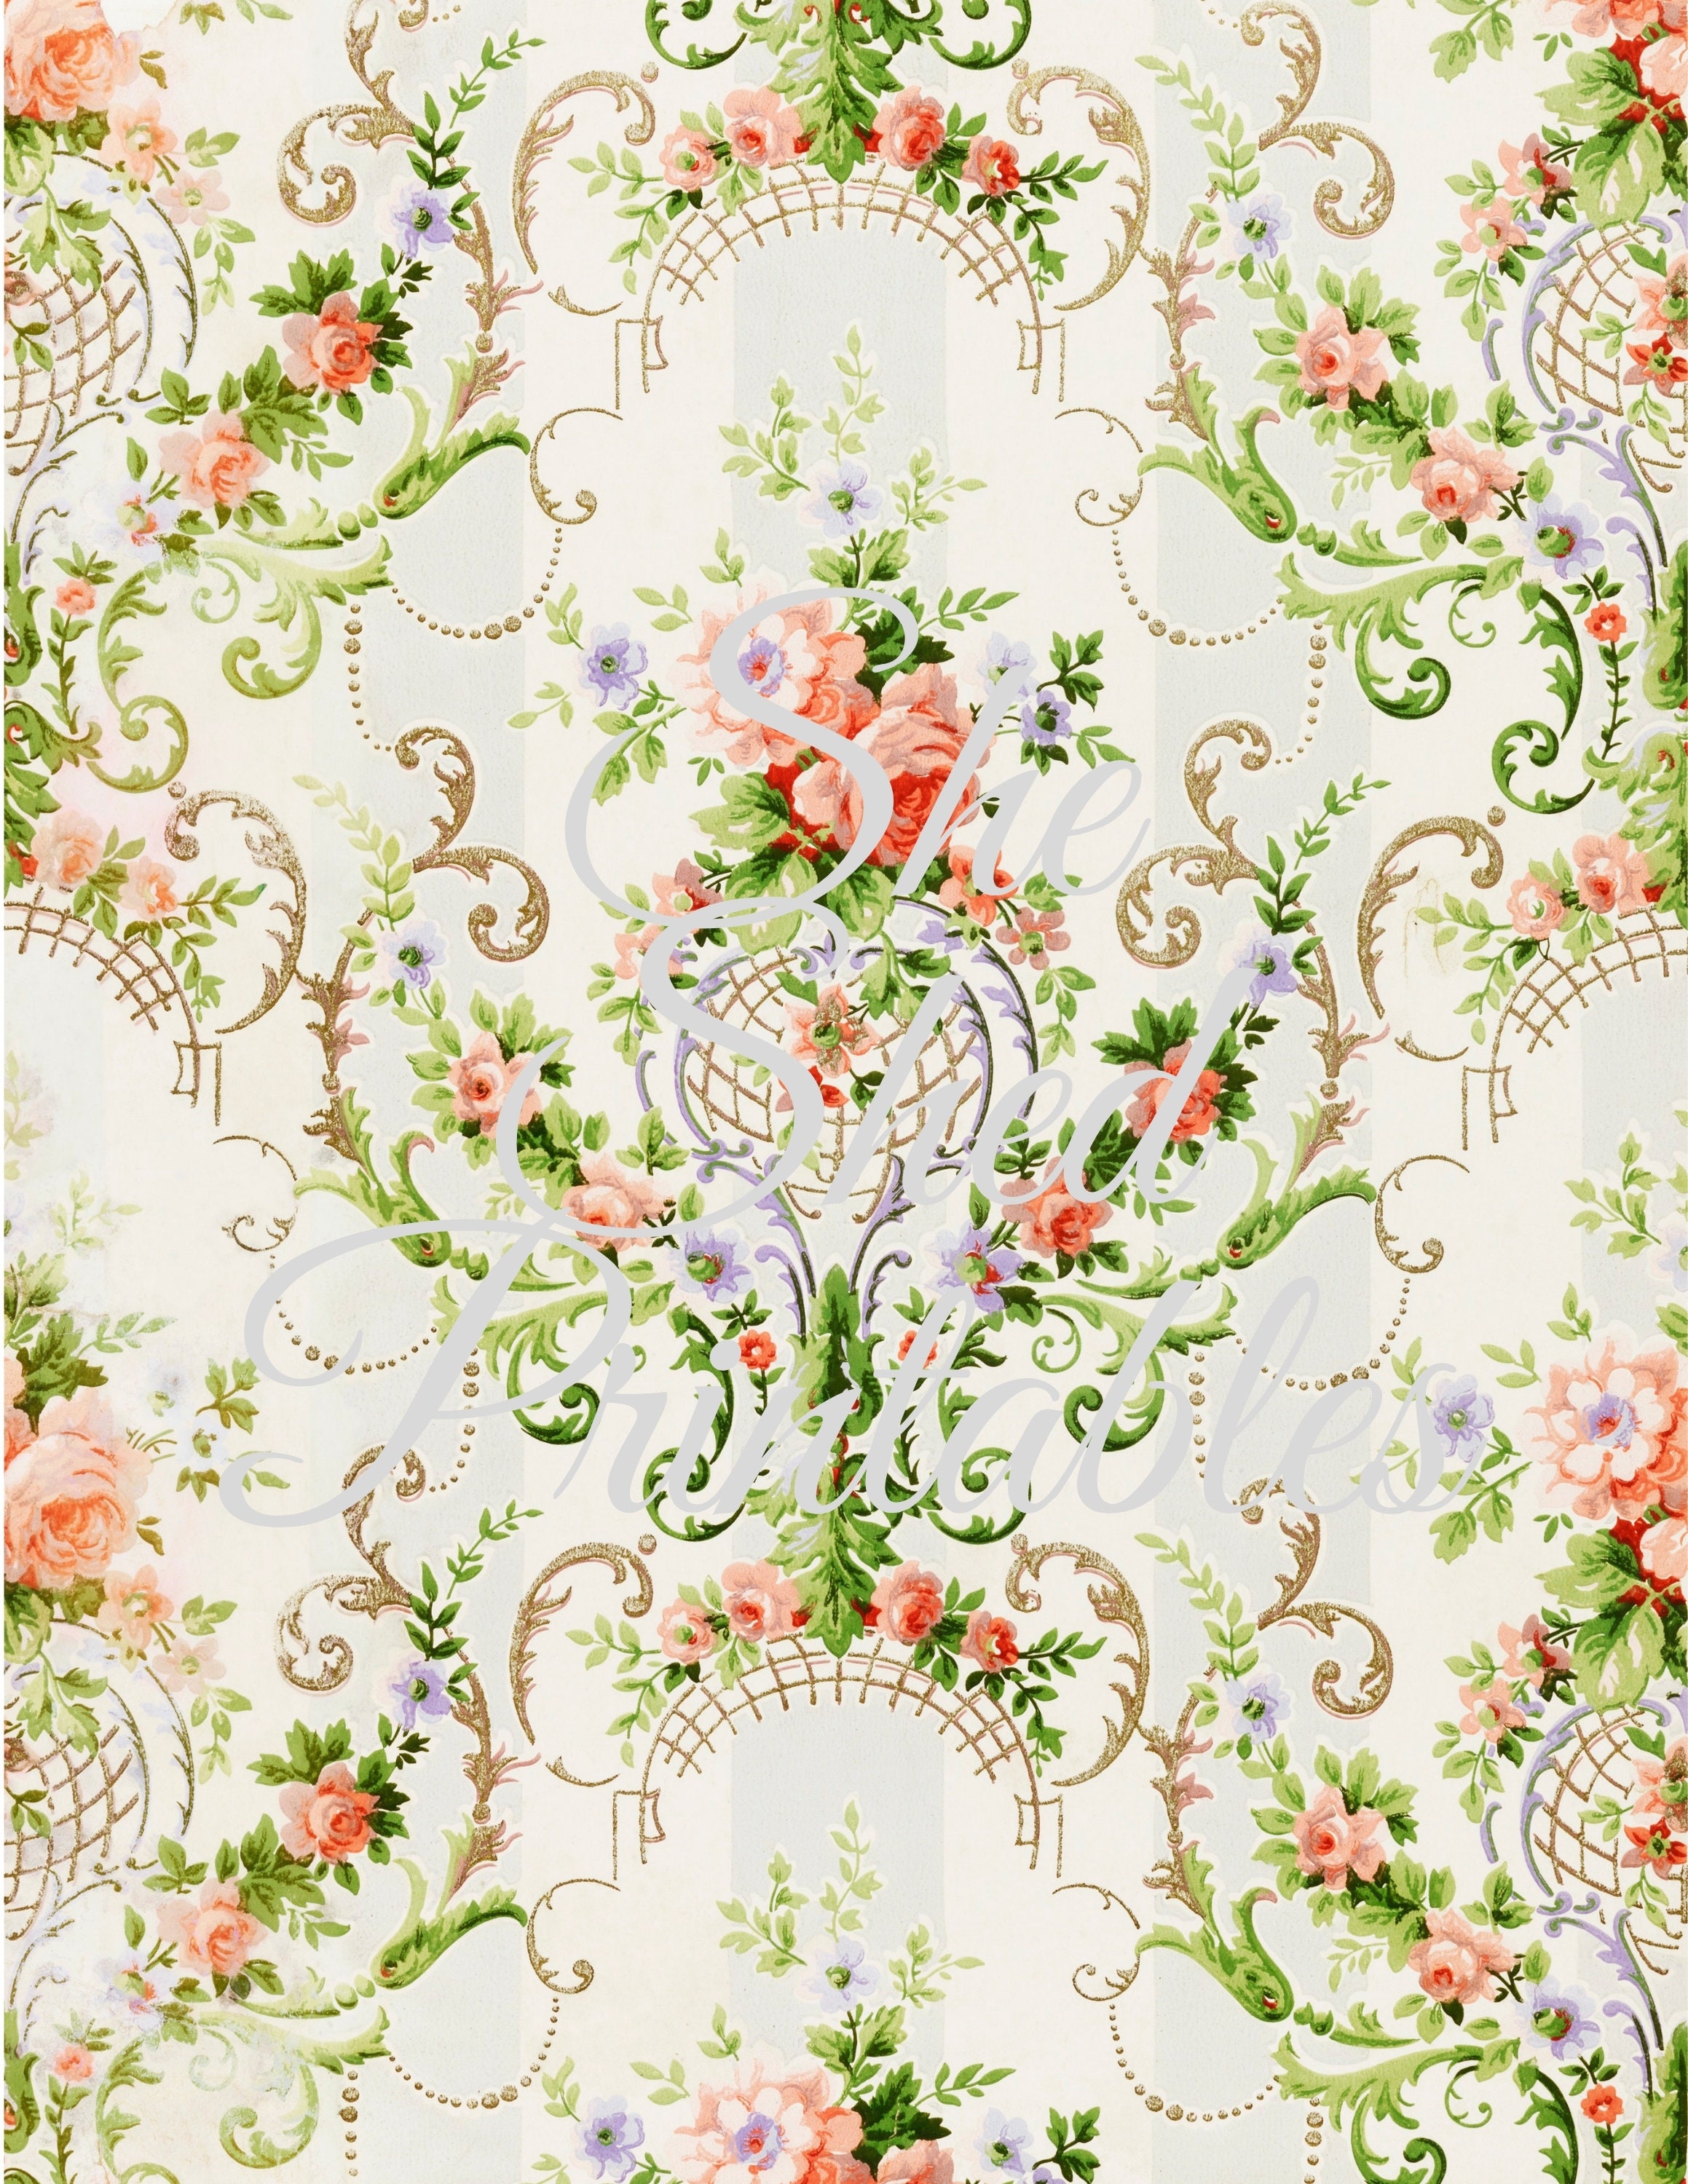 Aggregate more than 56 rococo wallpaper best - in.cdgdbentre